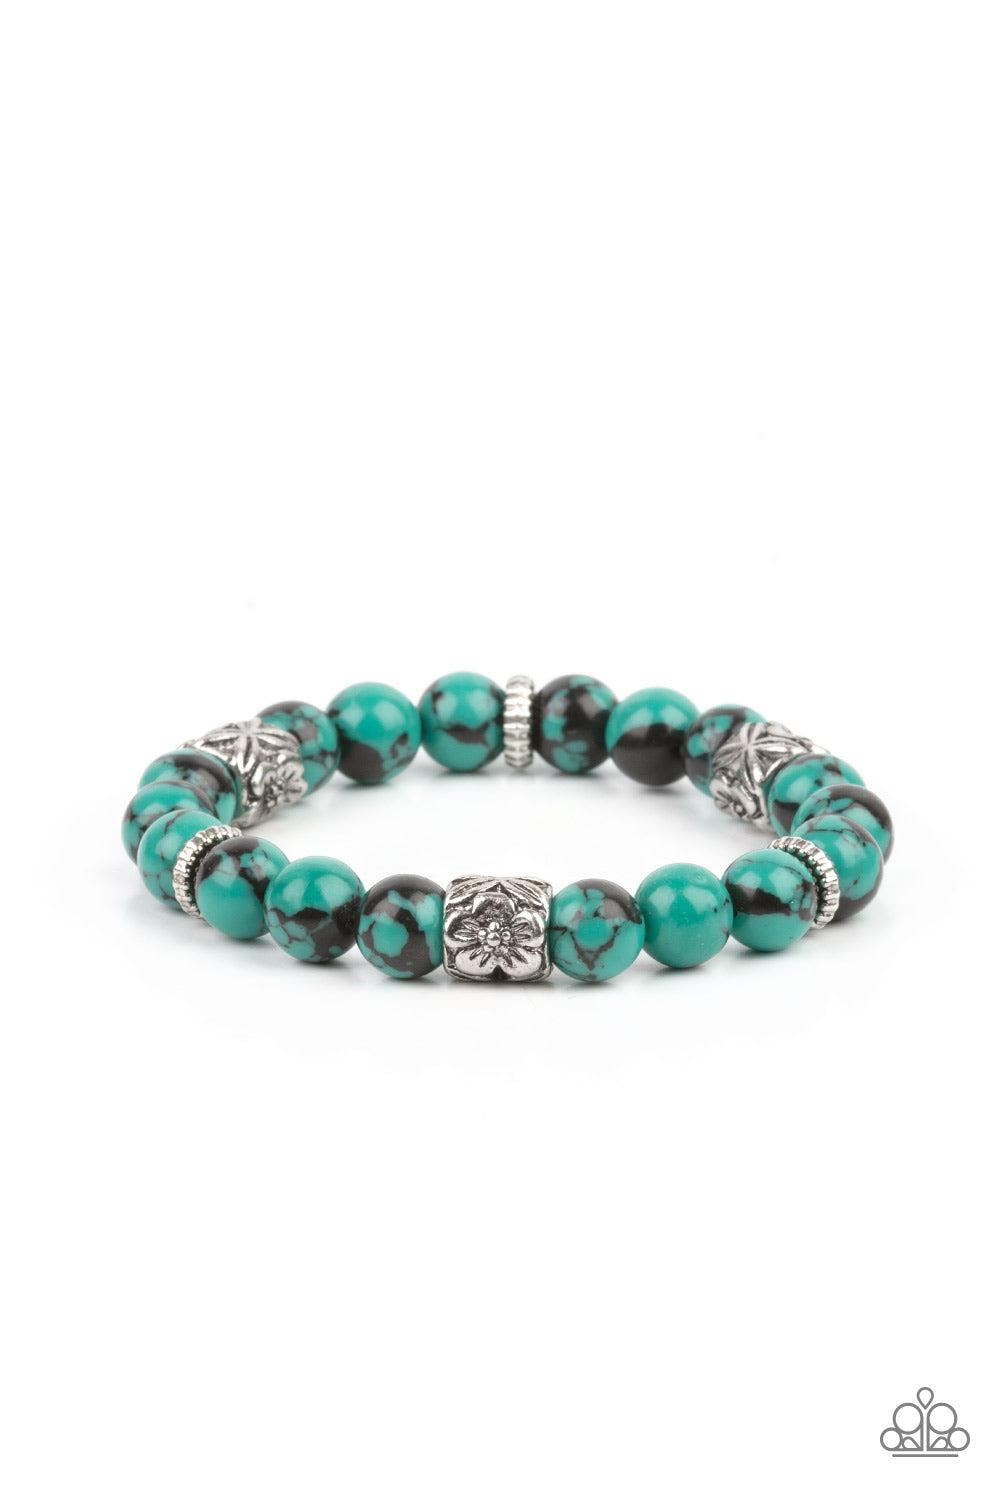 Garden Zen Green Urban Bracelet - Paparazzi Accessories.  An earthy collection of glassy green and black beads, textured silver rings, and floral embossed beads are threaded along stretchy bands around the wrist, creating a seasonal centerpiece.  ﻿All Paparazzi Accessories are lead free and nickel free!  Sold as one individual bracelet.